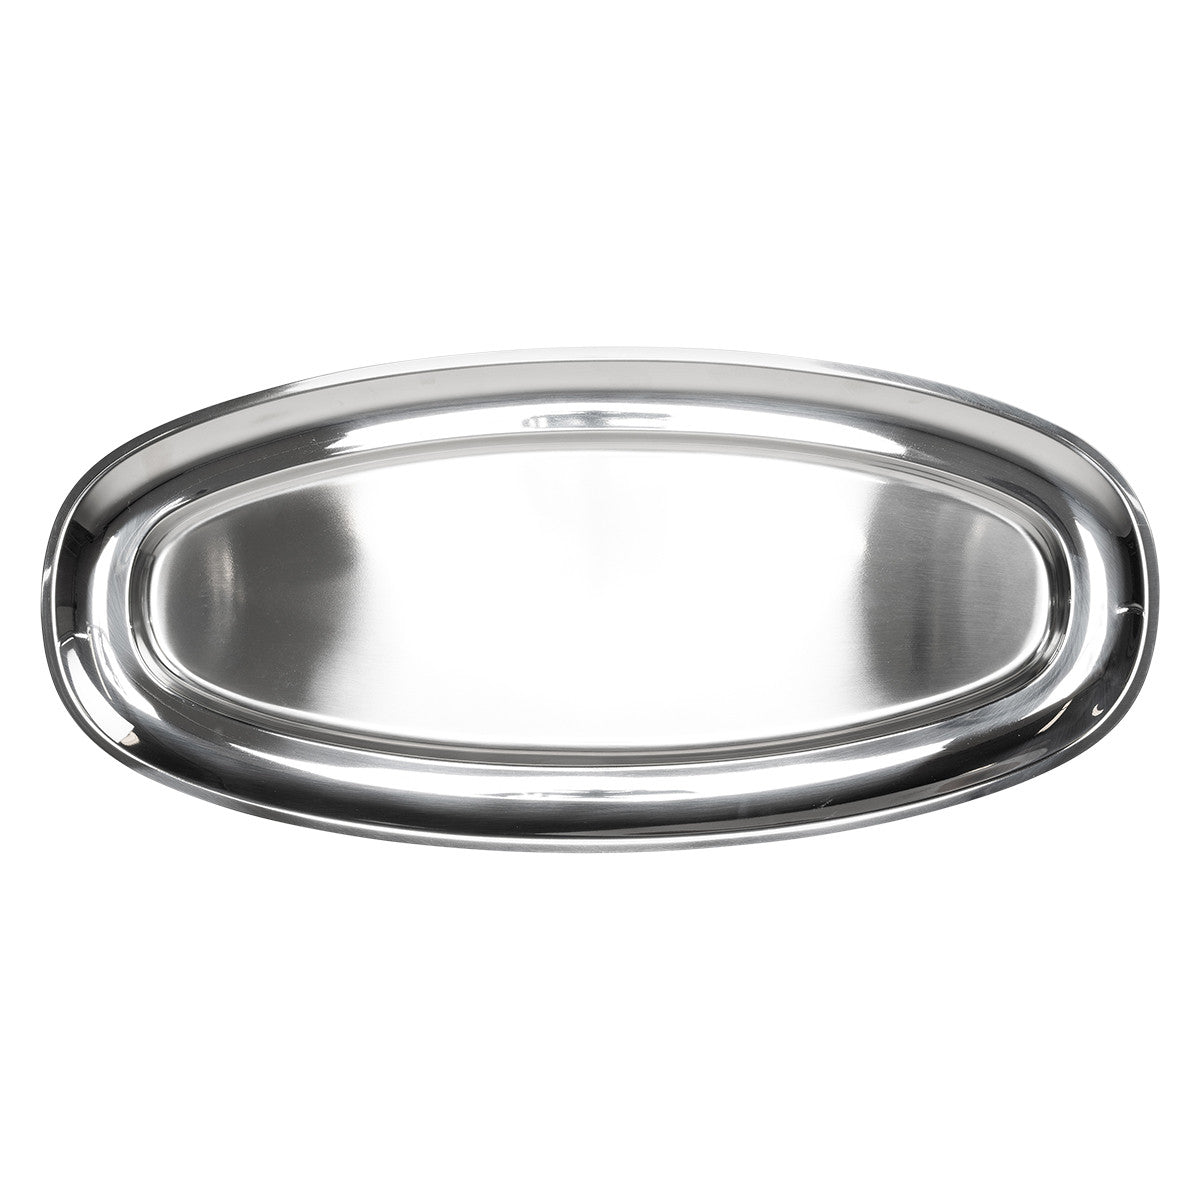 FISH TRAY 60x28 cm, STAINLESS STEEL